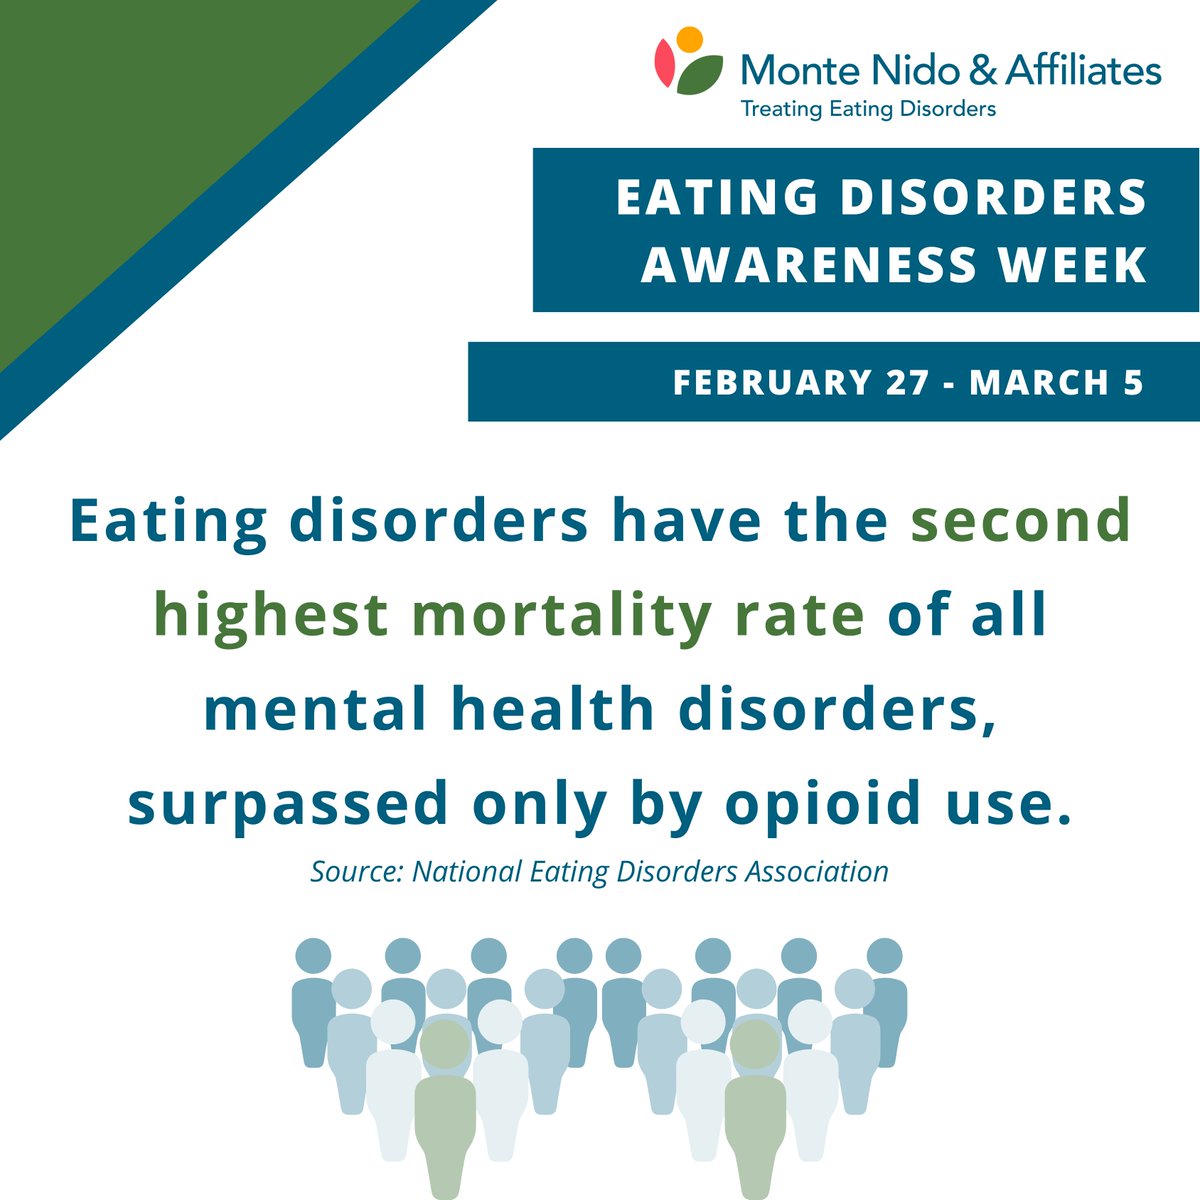 Did you know?

Eating disorders have the second-highest mortality rate of all mental health disorders.

Raise awareness this week and every week - #ItsTimeForChange

#eatingdisorderawarenessweek #edsupport #edawareness #edrecovery